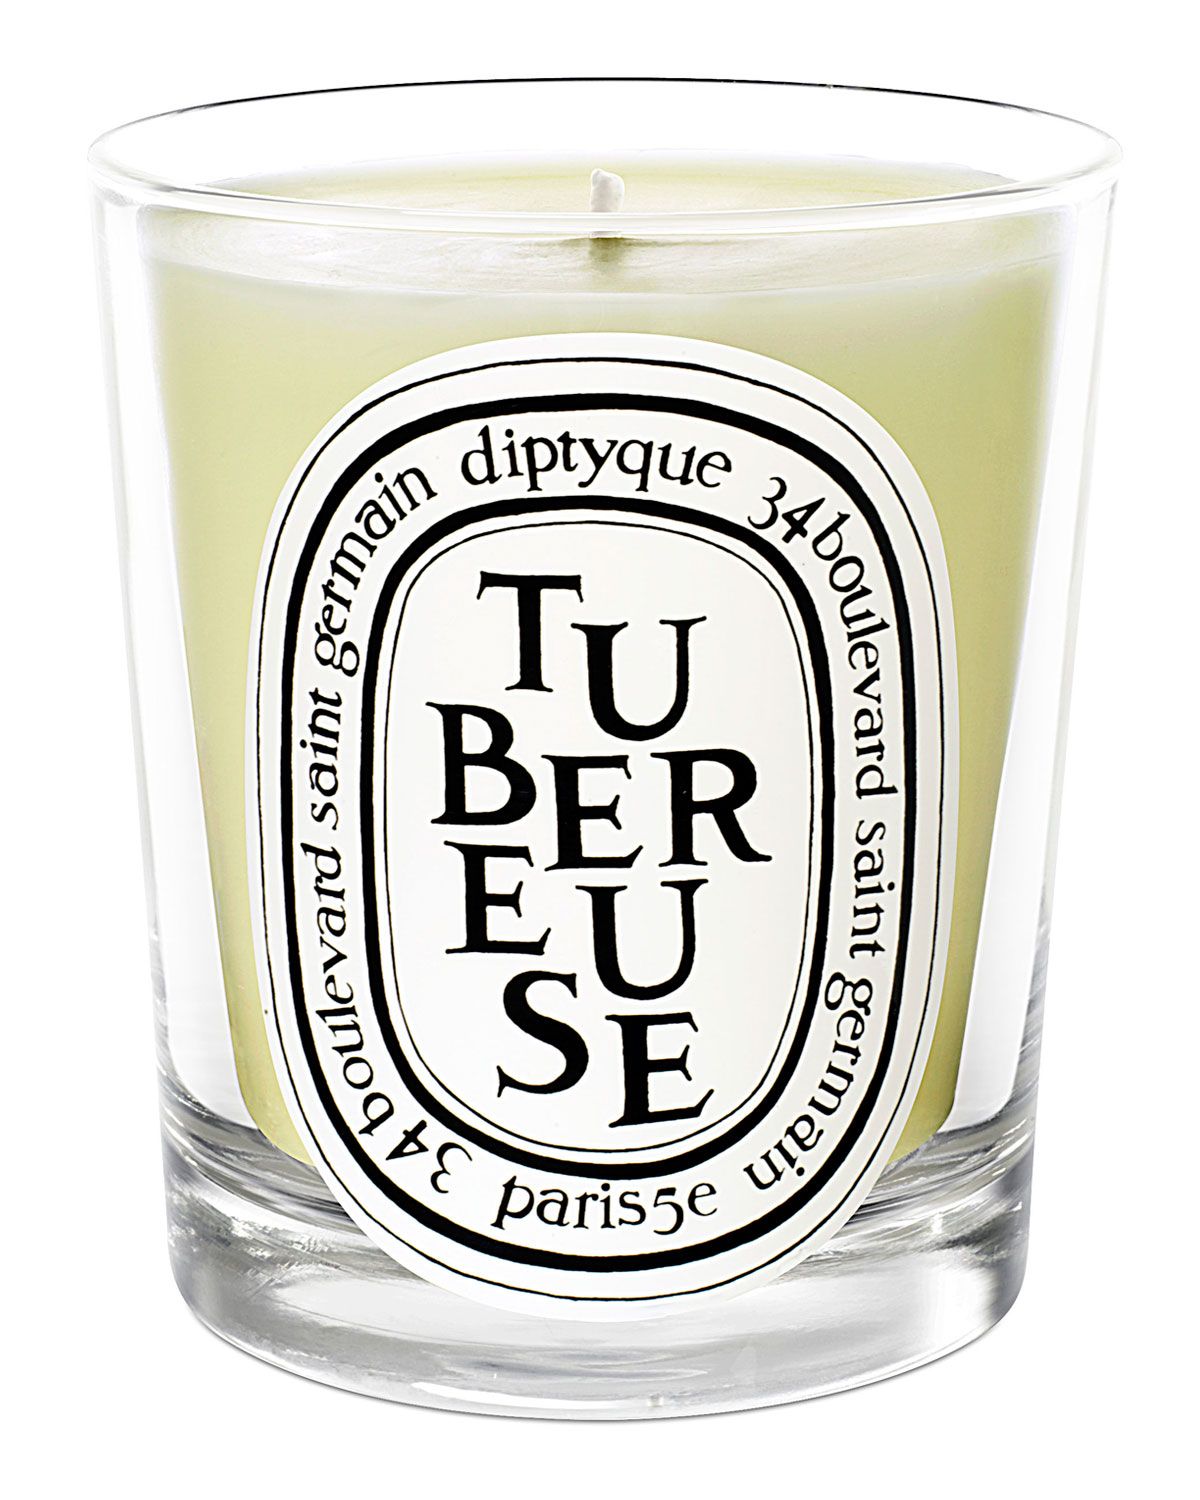 Diptyque Tuberose Large and Matching Items & Matching Items | Neiman Marcus | Neiman Marcus